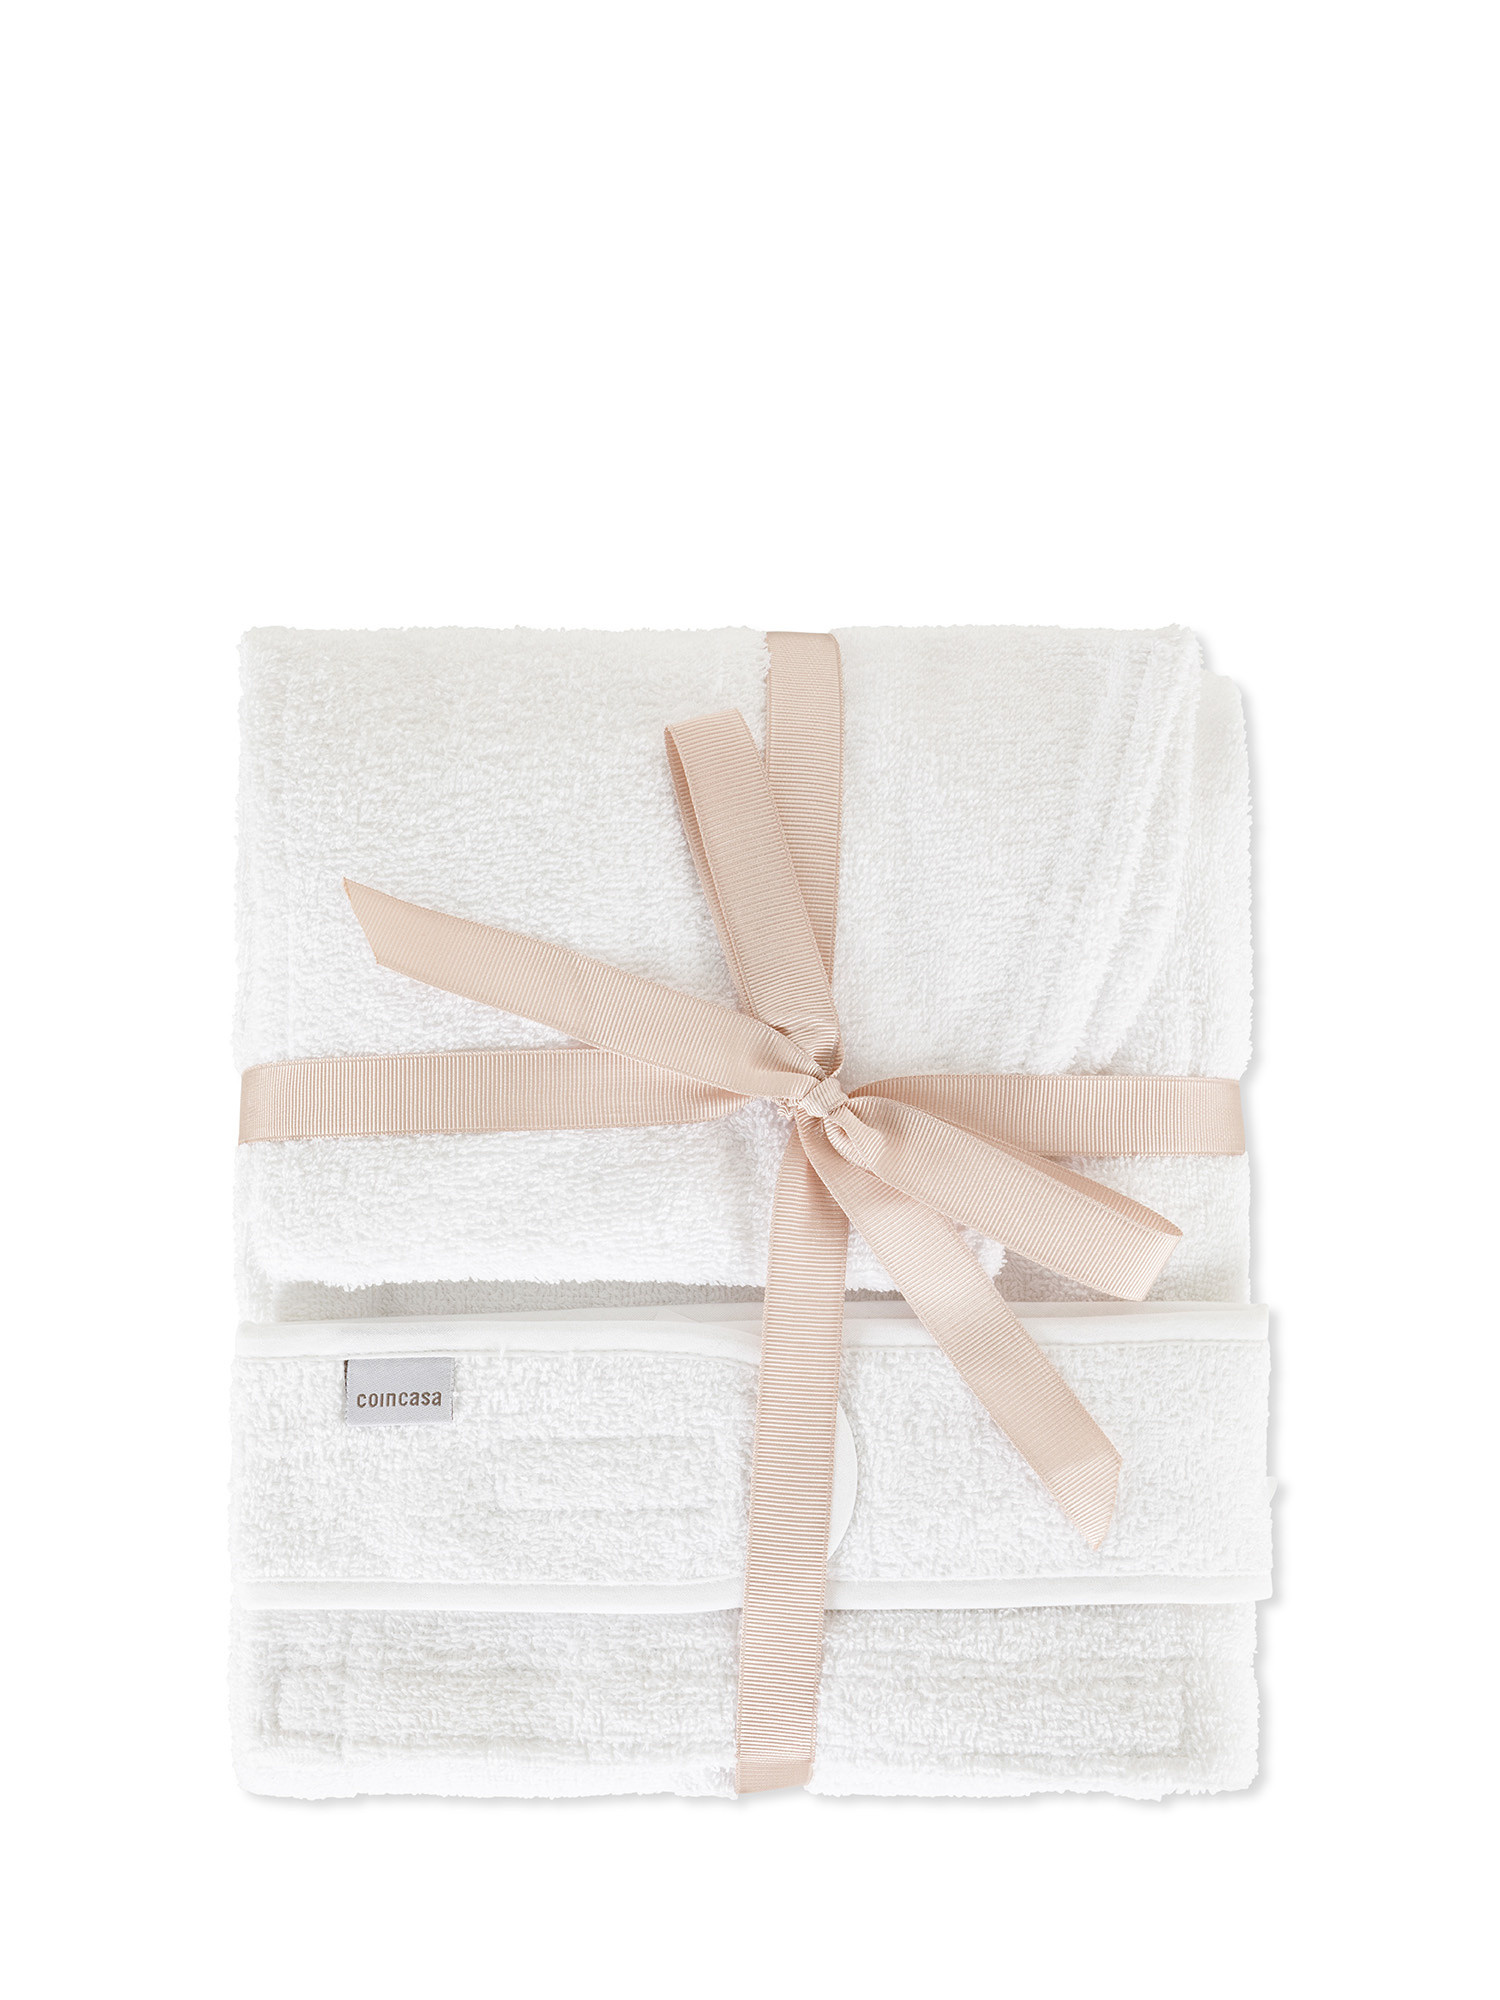 Turban beauty band bath towel set in cotton terry, White, large image number 0